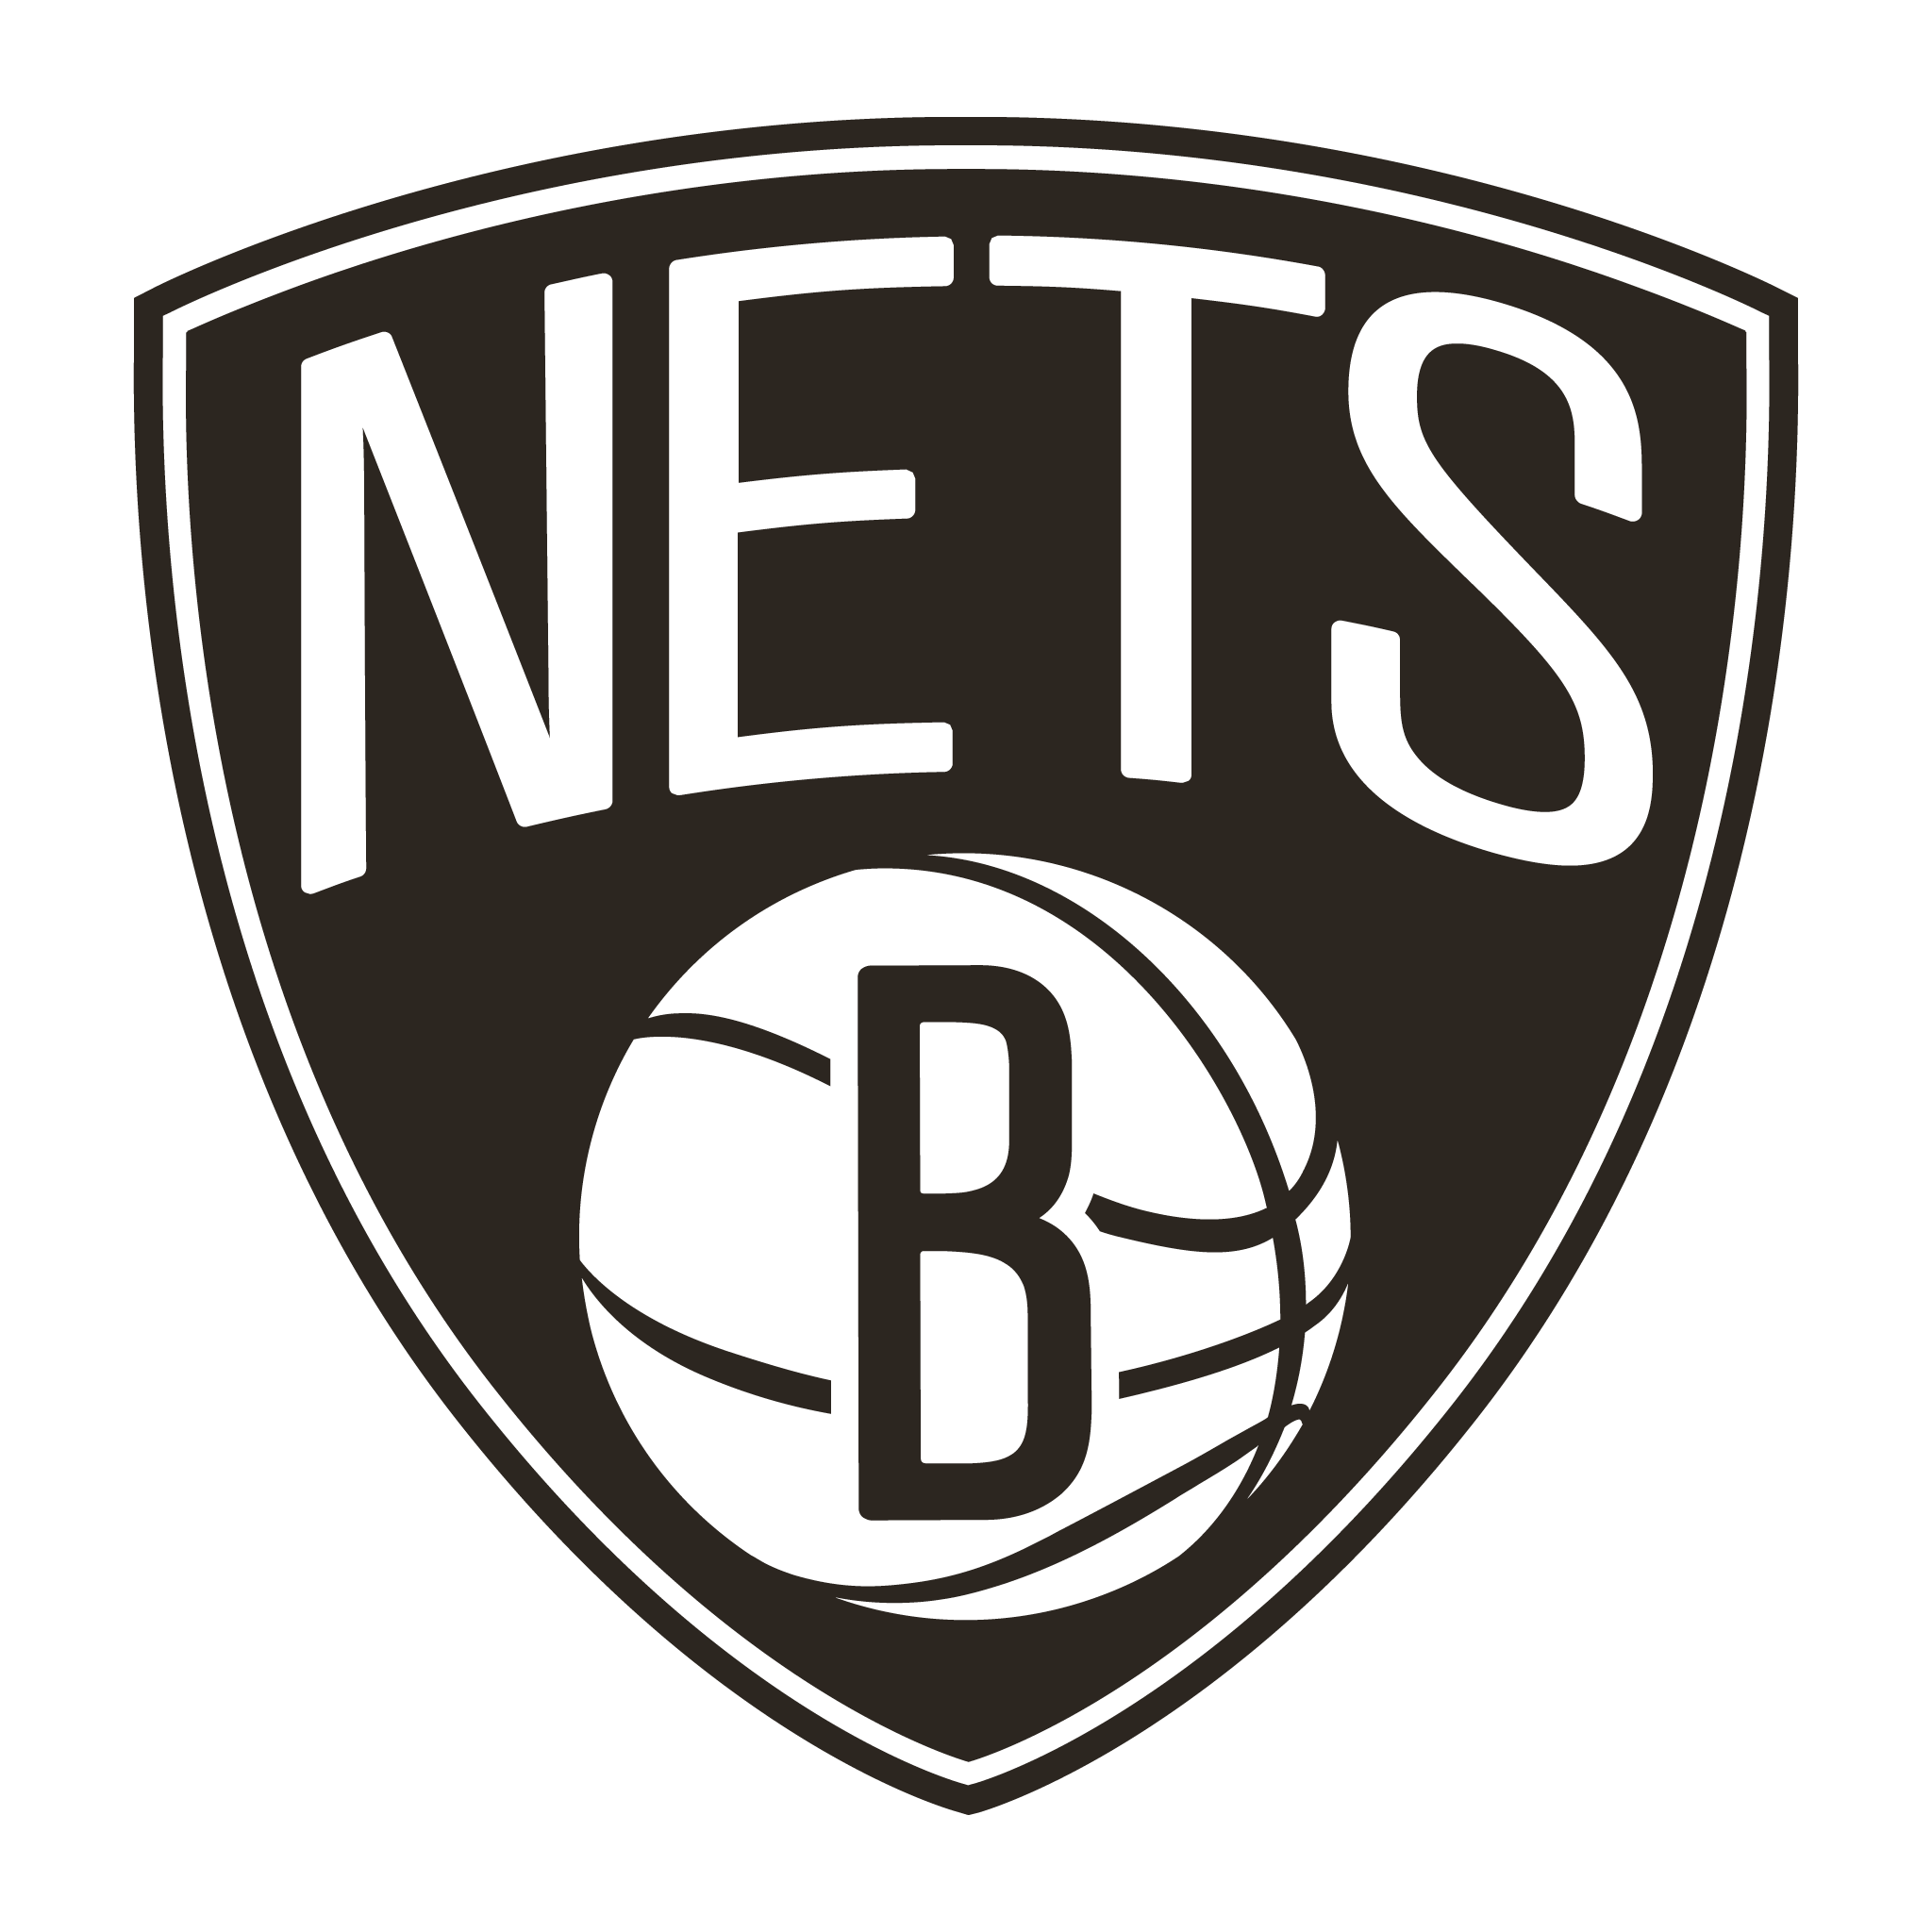 Nets Logo PNG Pic